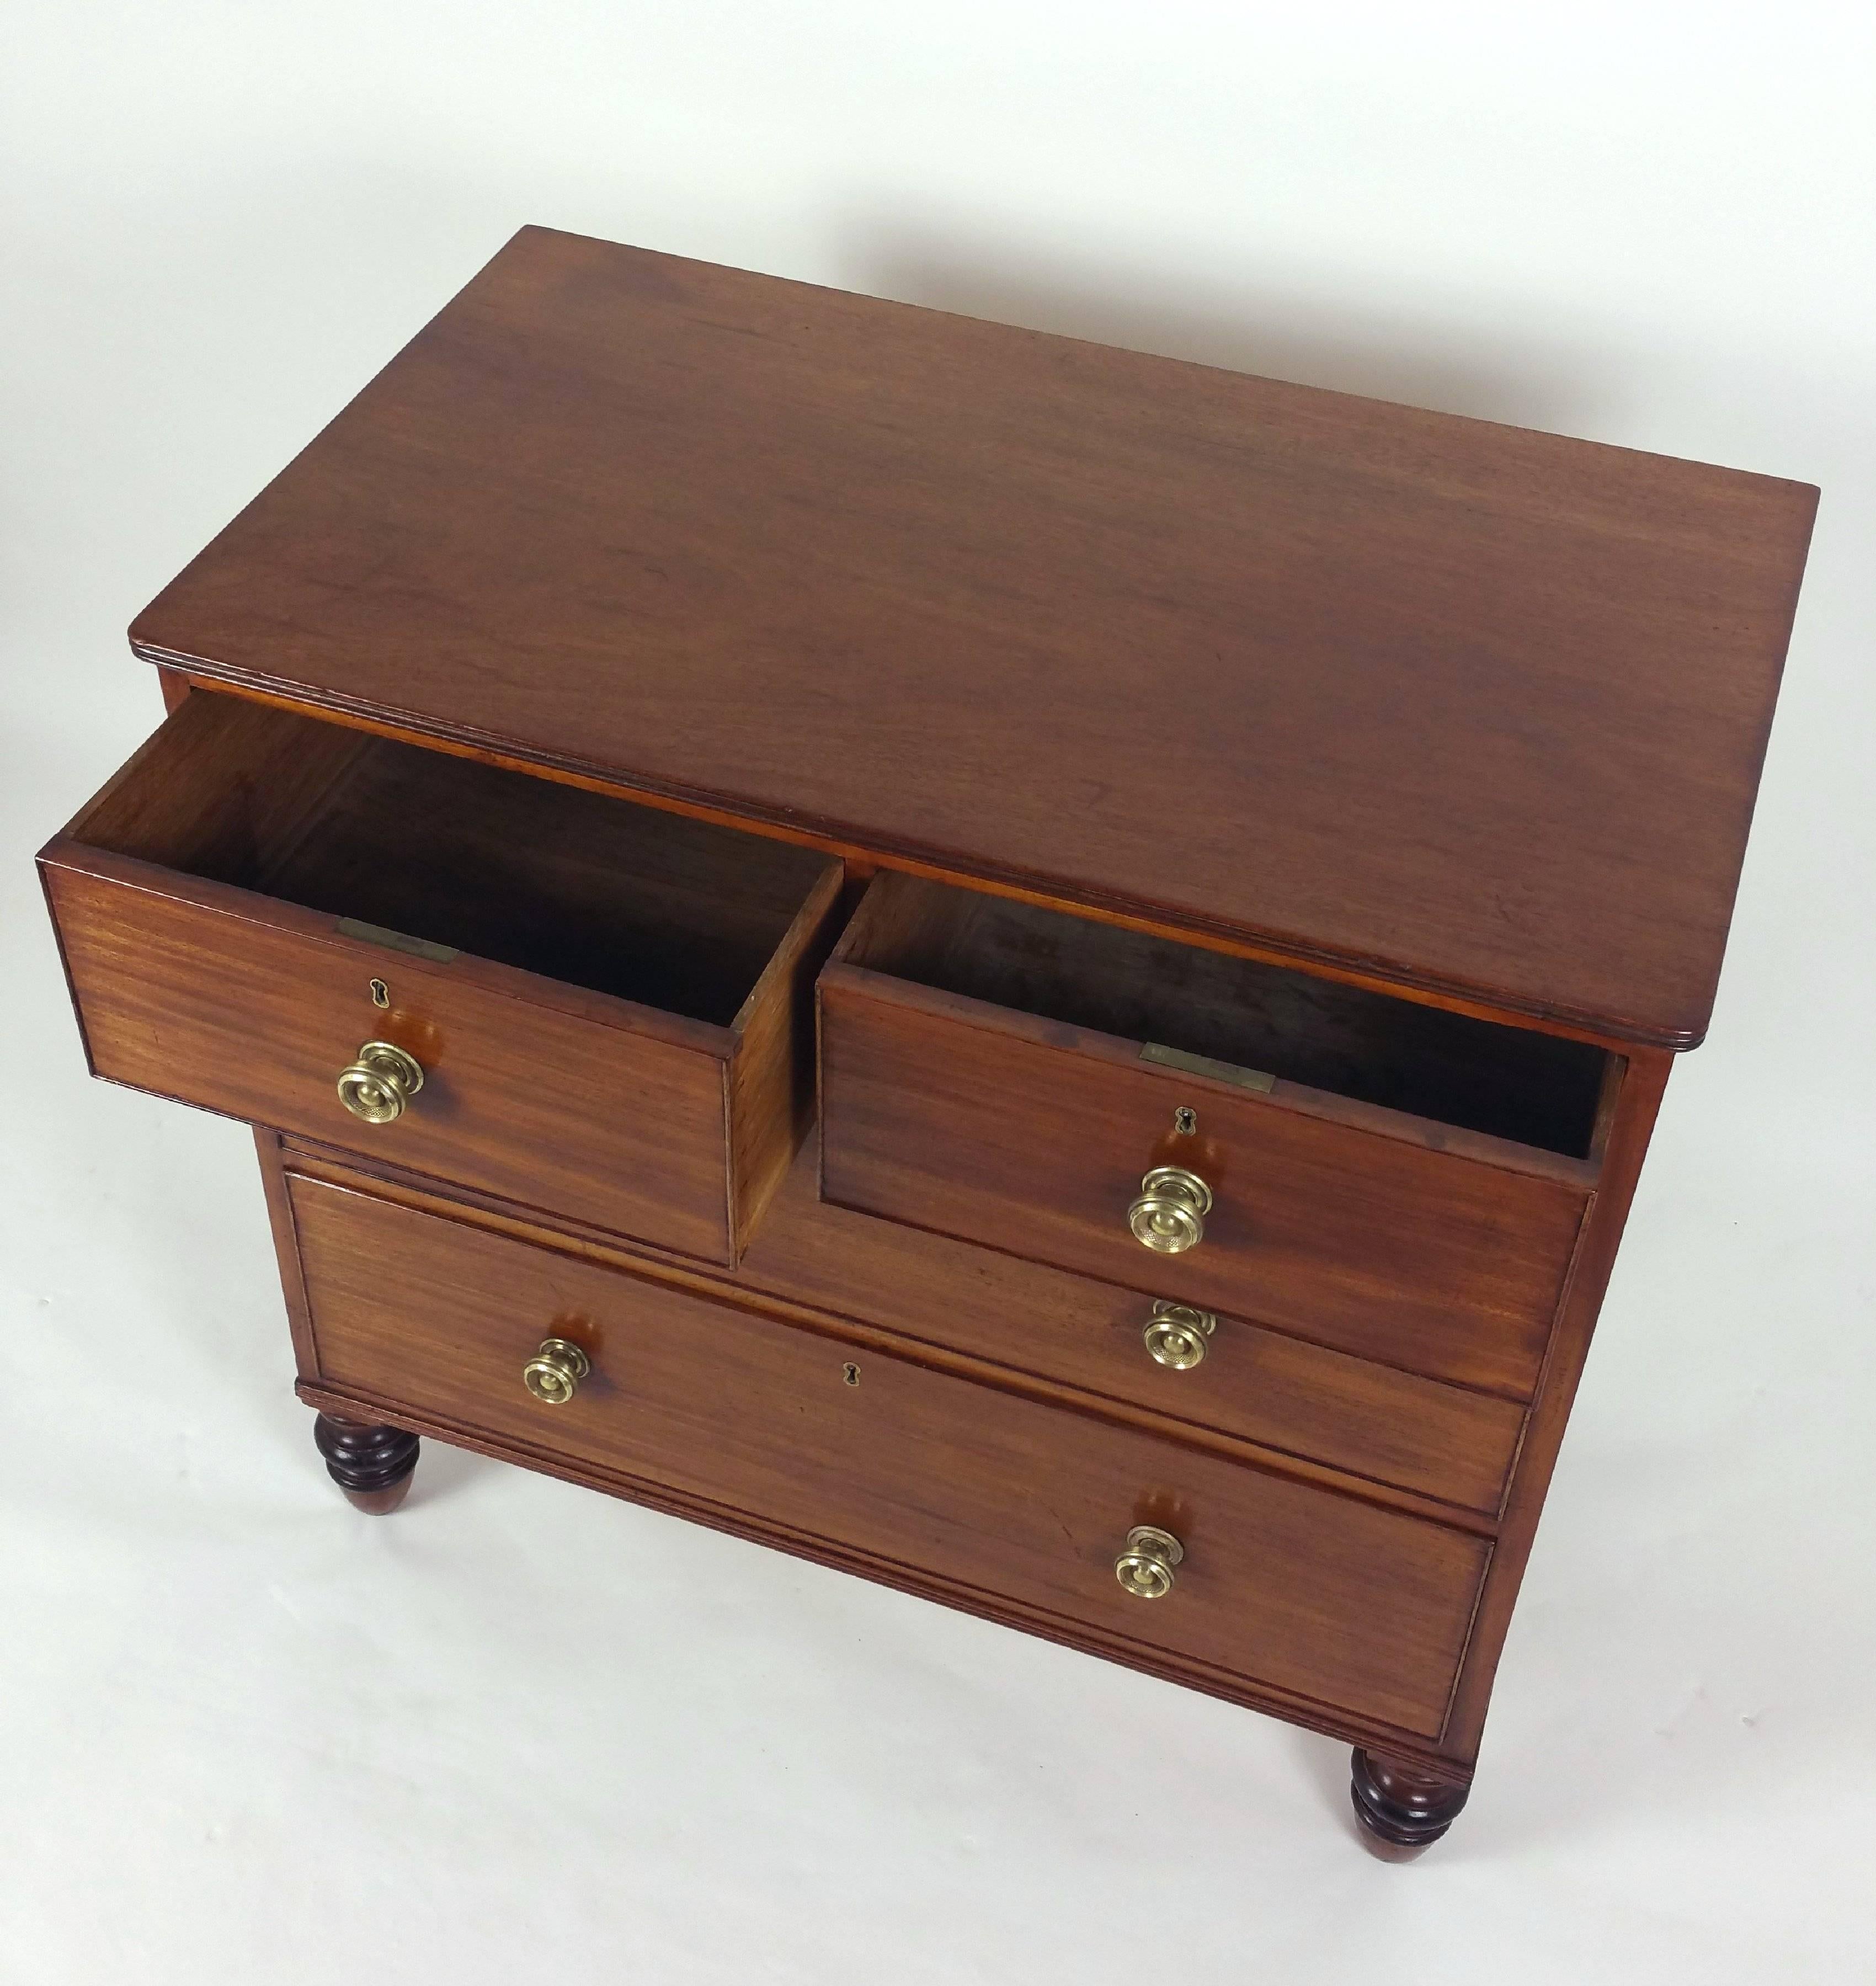 This Regency figured mahogany low chest of drawers features two short drawers over two long drawers, with the original brass knob handles and ebonized highlights. The chest is supported on very attractive turned legs with rounded front corners. It